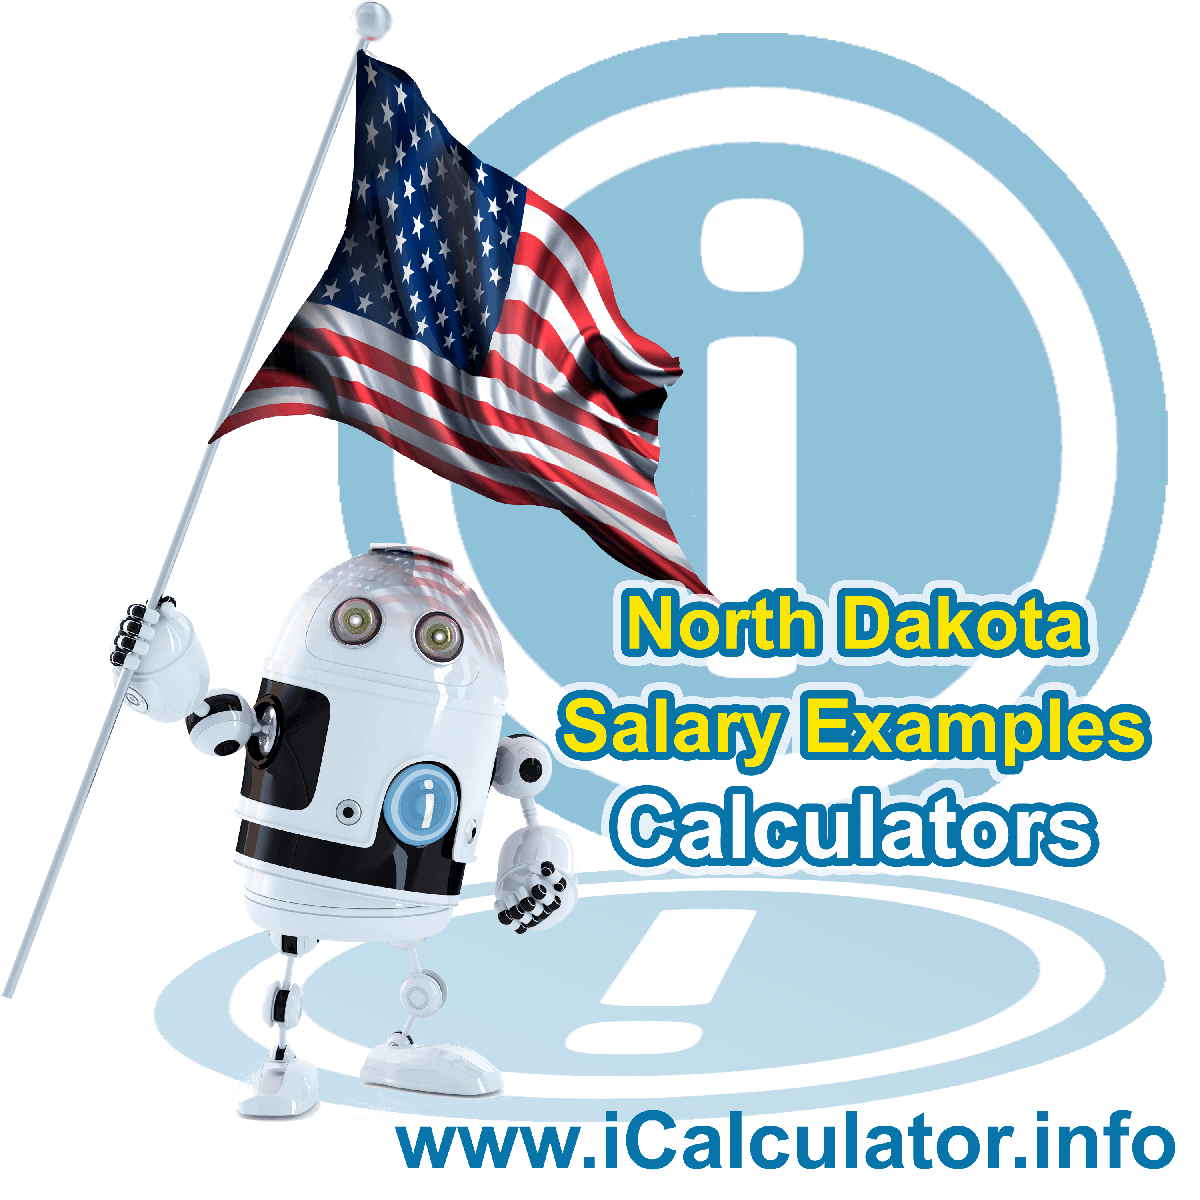 North Dakota Salary Example for $ 290,000.00 in 2023 | iCalculator™ | $ 290,000.00 salary example for employee and employer paying North Dakota State tincome taxes. Detailed salary after tax calculation including North Dakota State Tax, Federal State Tax, Medicare Deductions, Social Security, Capital Gains and other income tax and salary deductions complete with supporting North Dakota state tax tables 